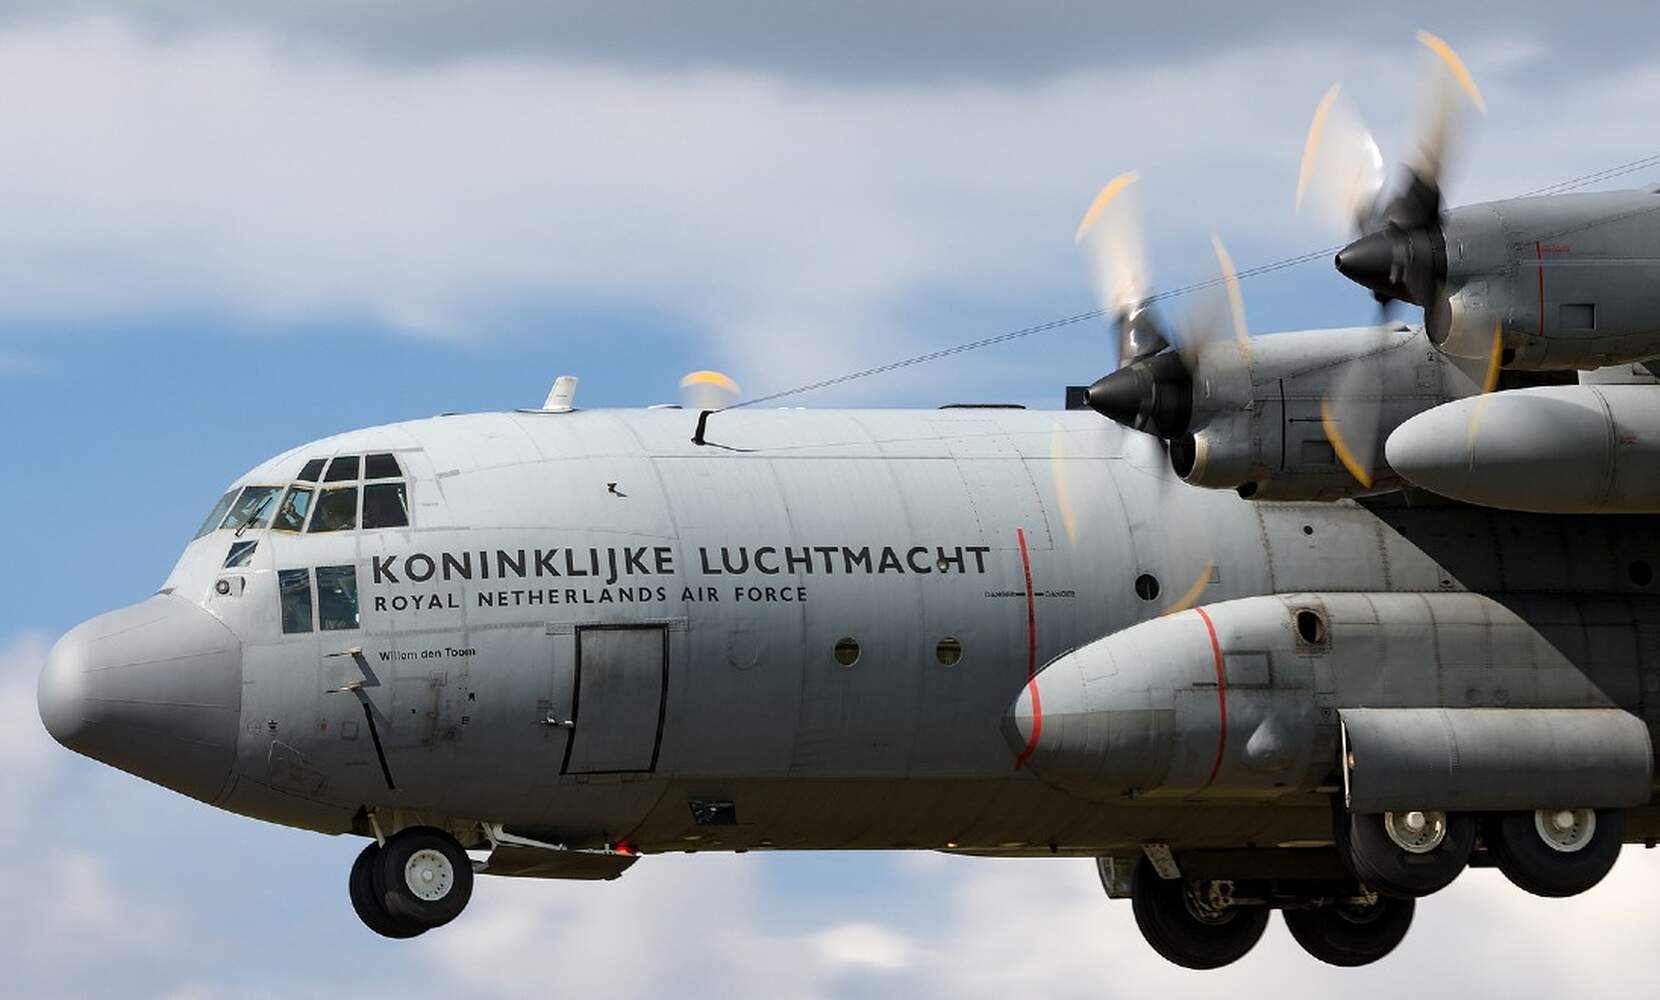 Royal Netherlands Air Force Aircraft returned from Afghanistan without dutch citizens